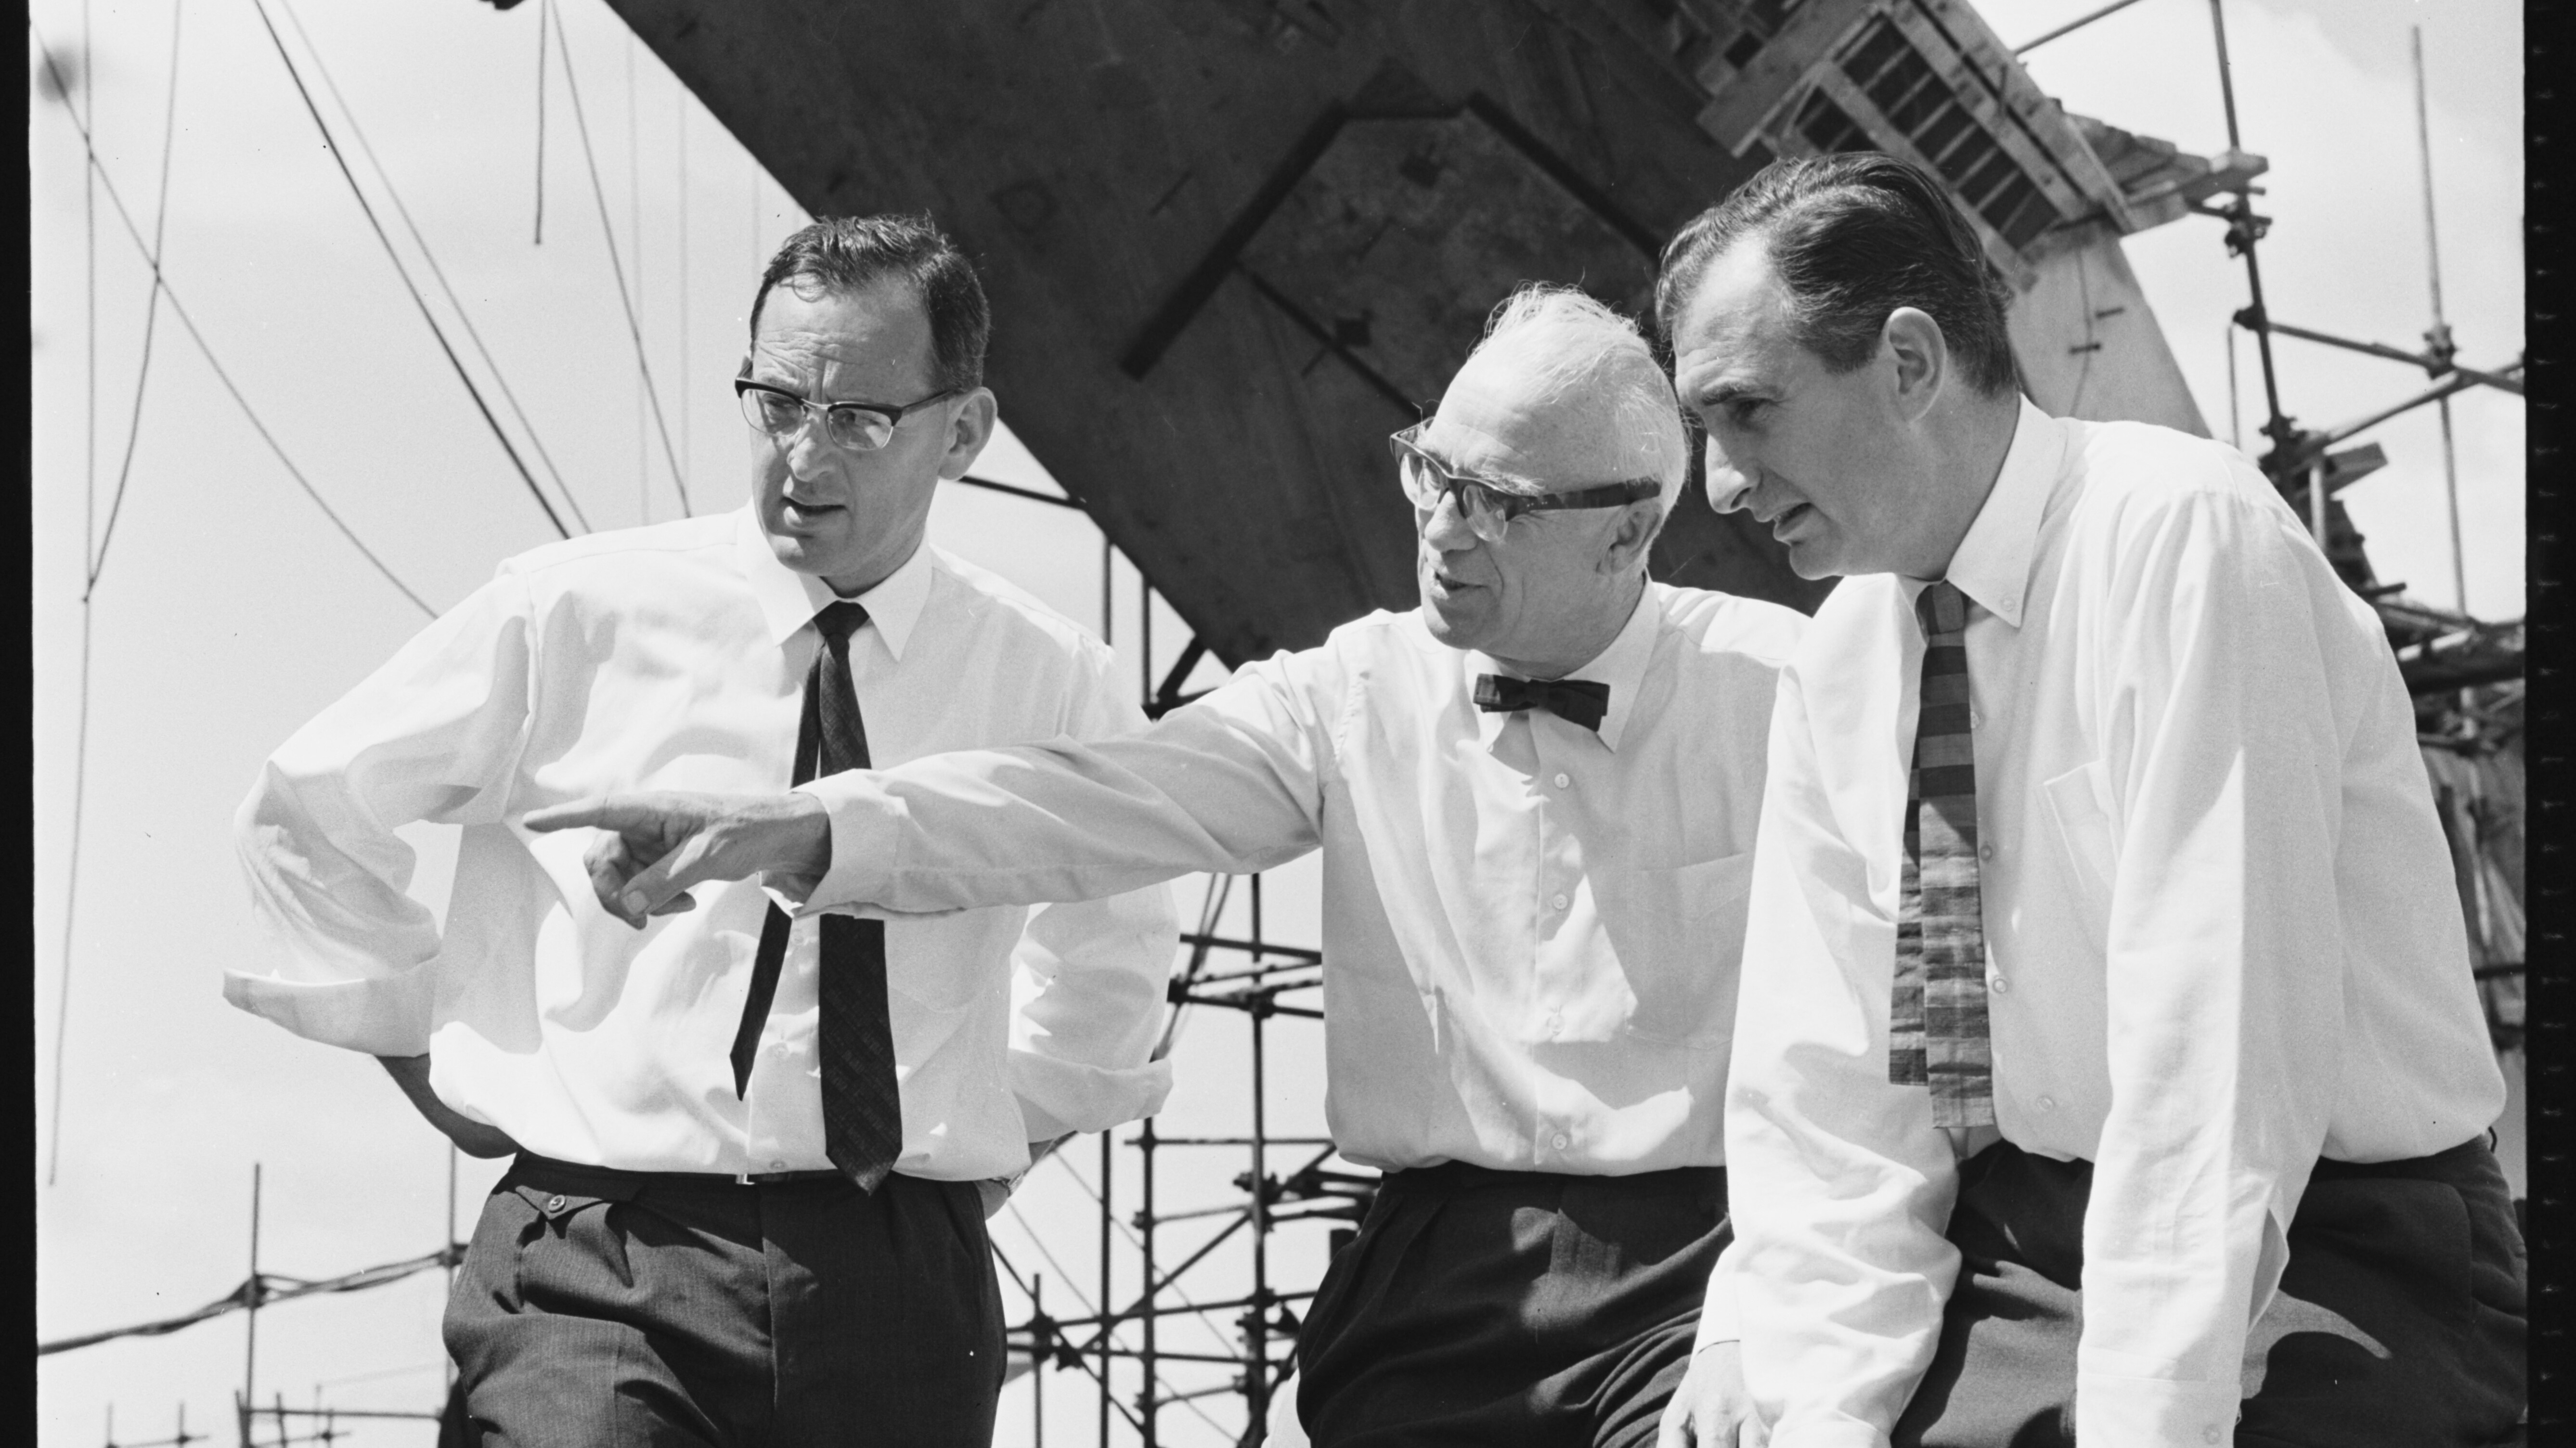 Mick Lewis, Ove Arup and Jack Zunz on the Opera House construction site, October 1964, Max Dupain, Mitchell Library, State Library of New South Wales